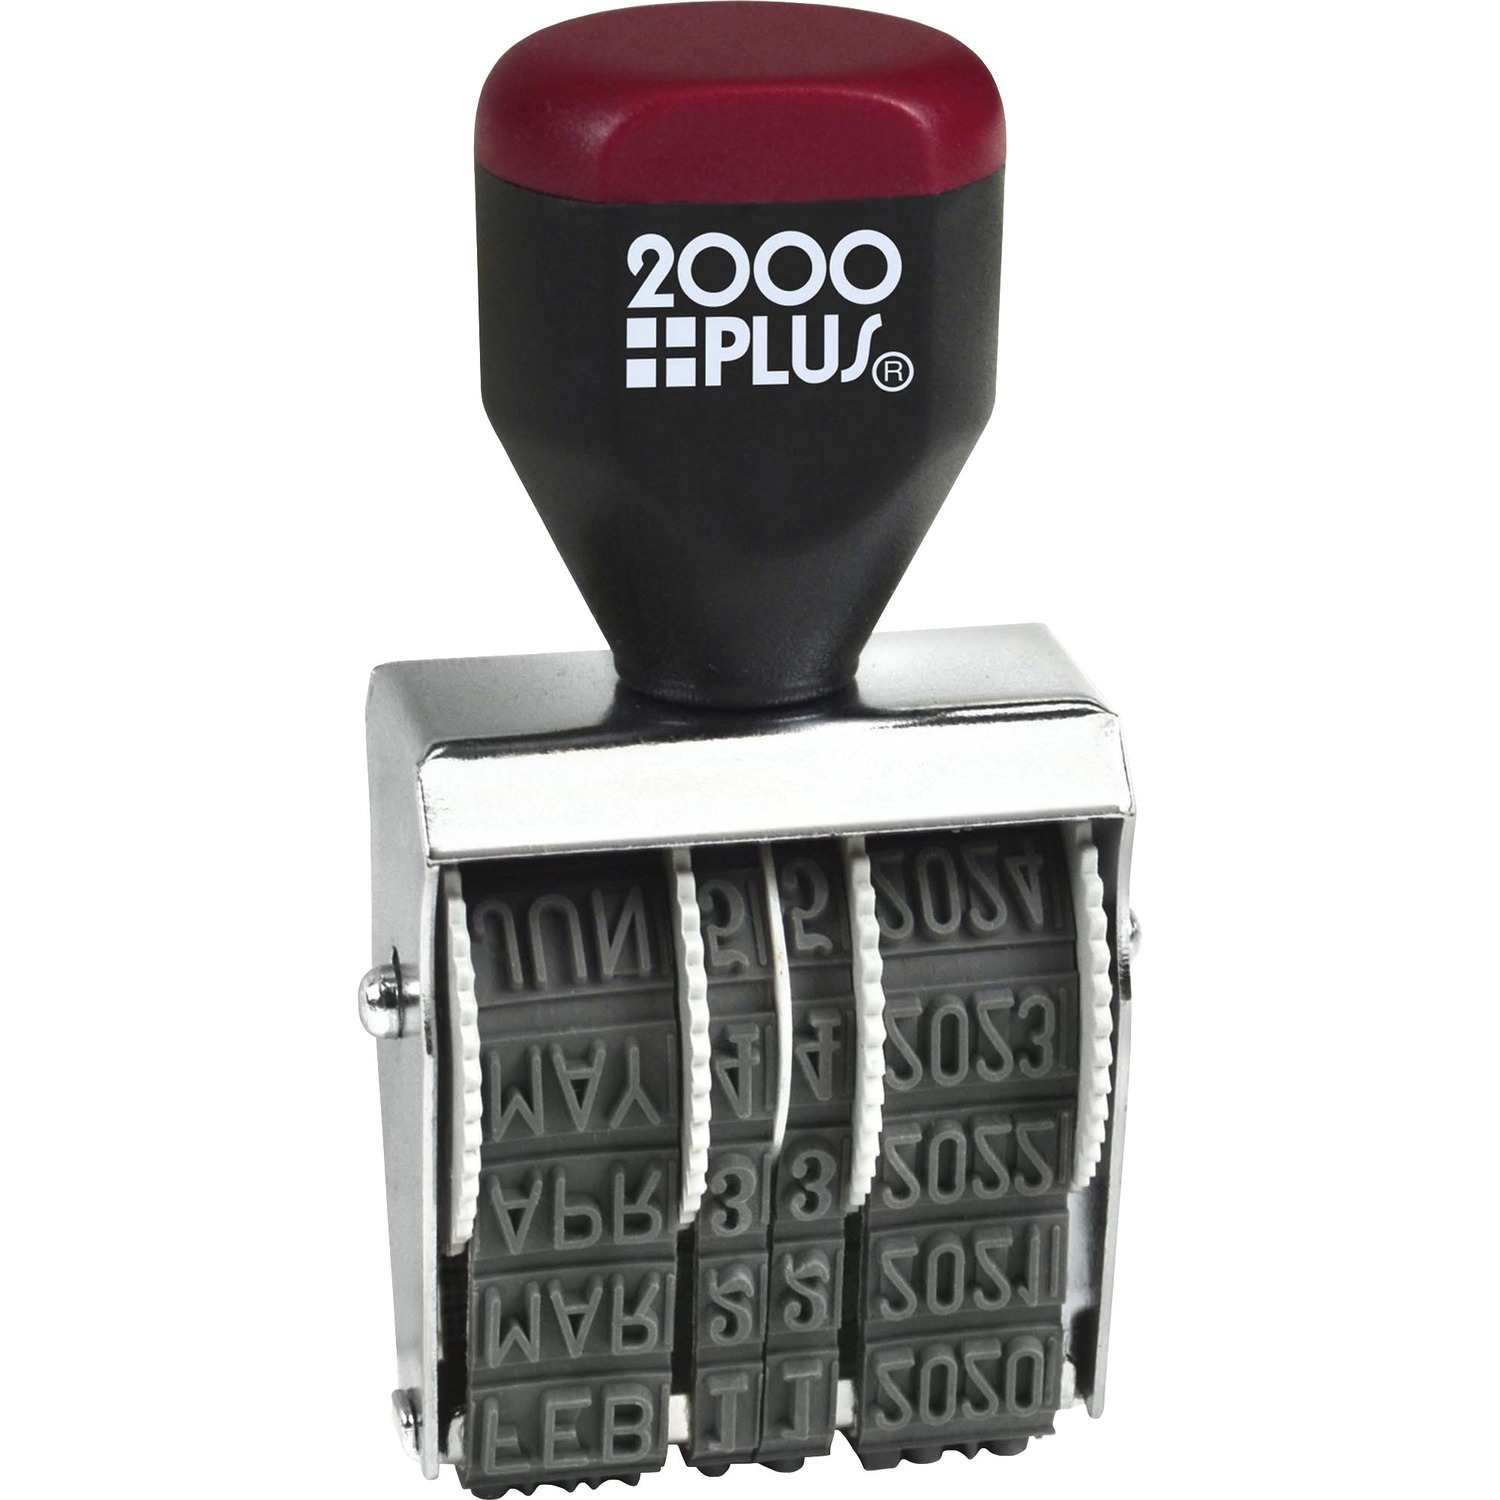 COSCO 2000 Plus Four-band Date Stamp - image 2 of 3